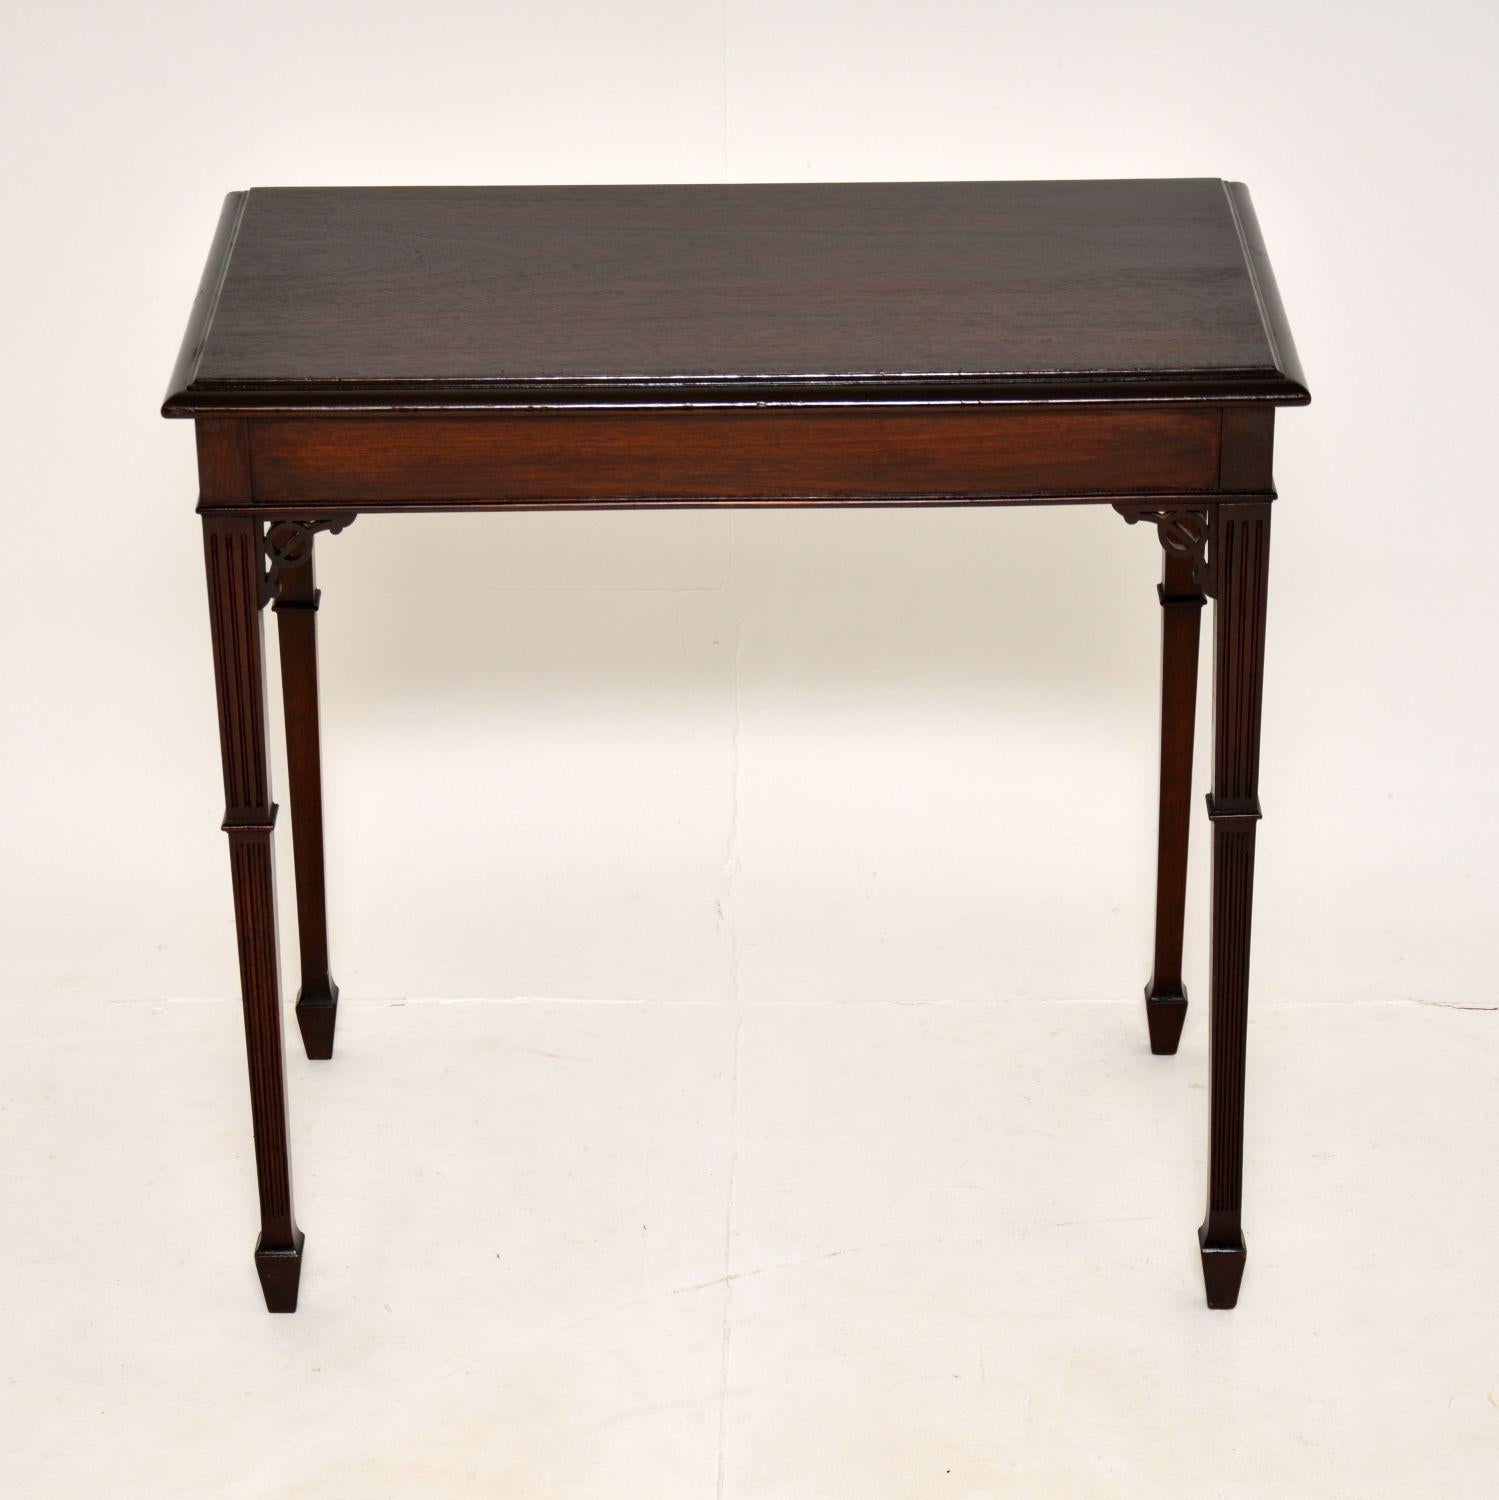 A smart and very useful antique Edwardian side table. This was made in England, it dates from the 1900-1910 period.

It is beautifully made and finished identically front and back, so can be used as a free standing table or against a wall. The legs